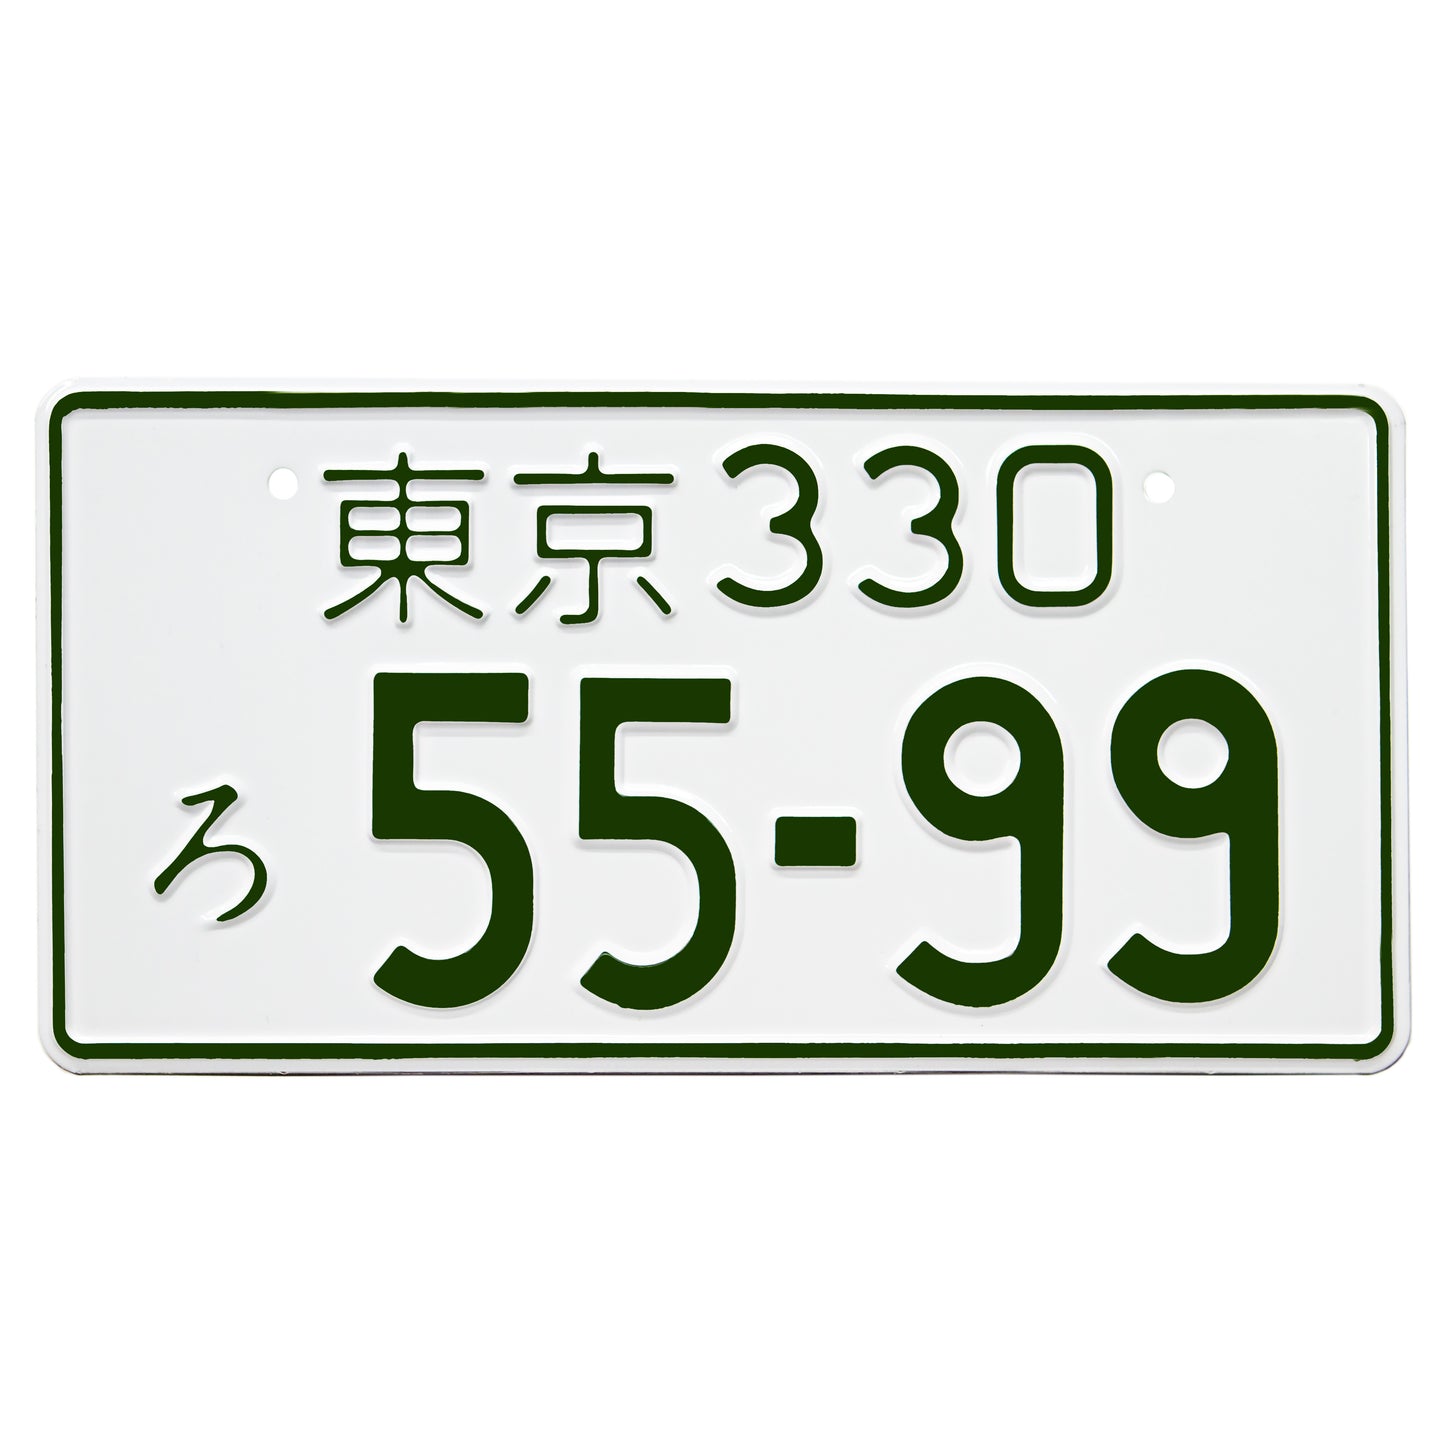 Japanese license plate gloss white with green text front view